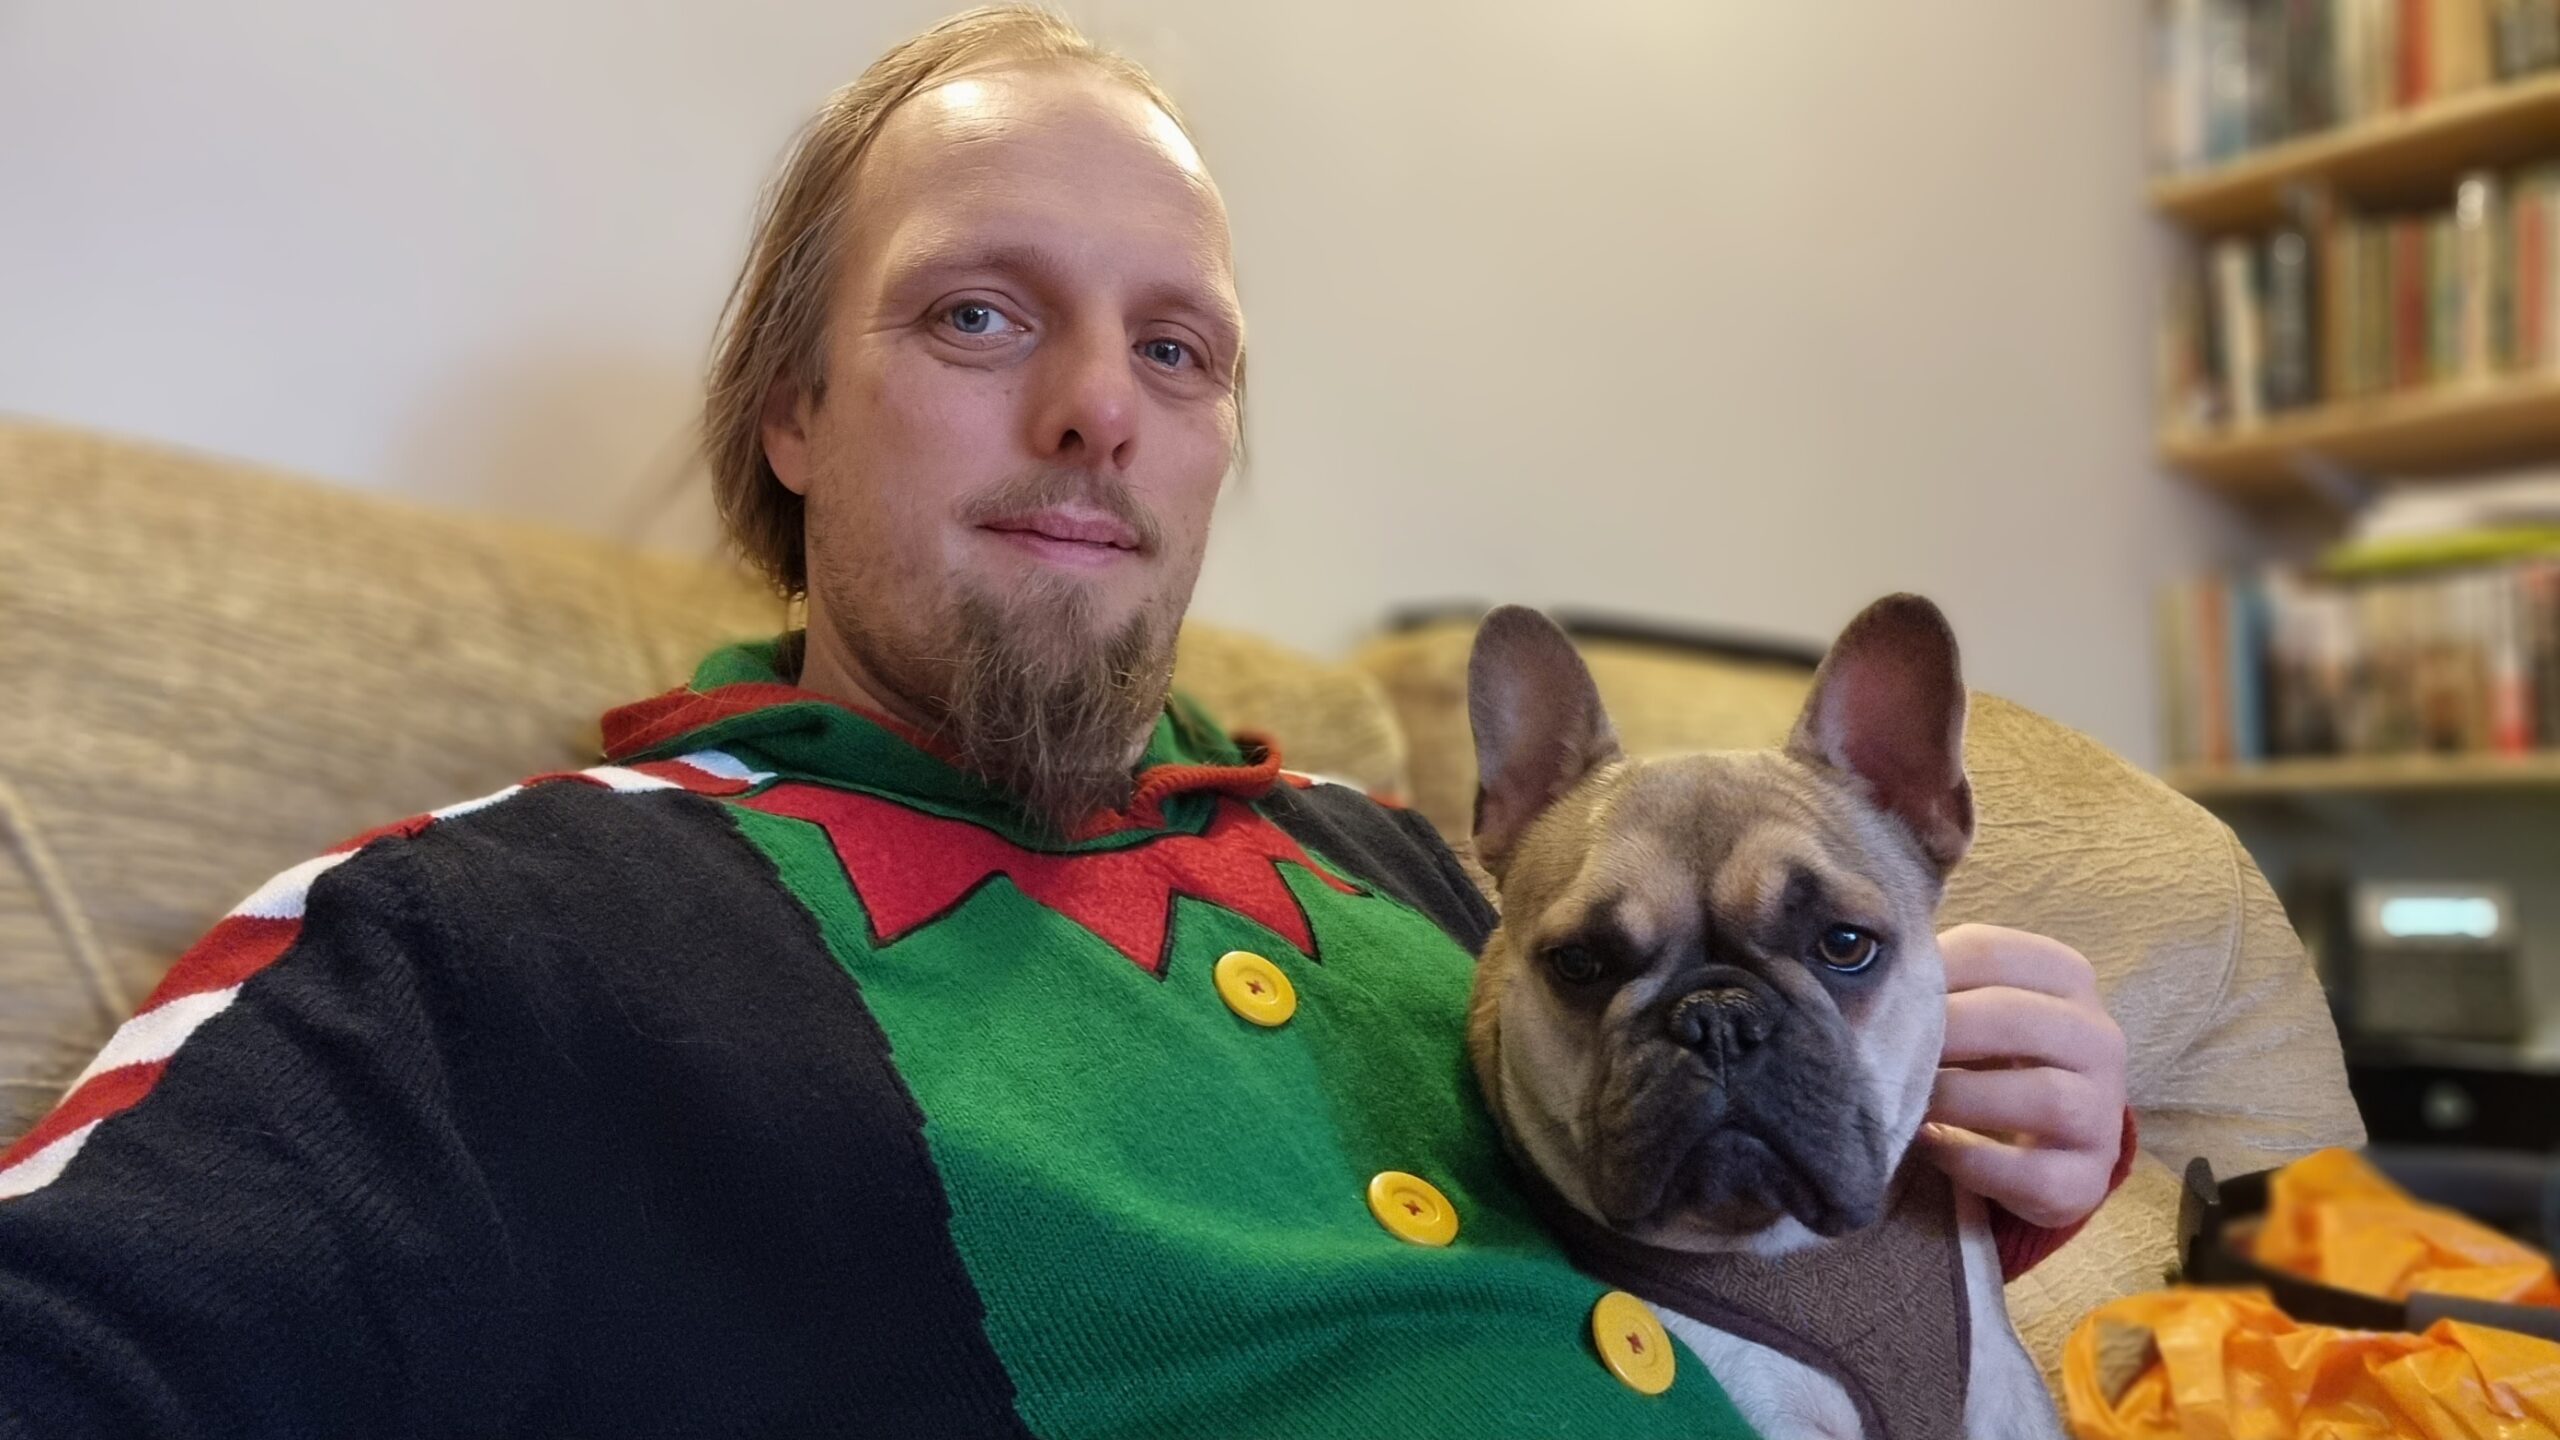 Dan, wearing an "elf costume" Christmas jumper, looks into the camera while cuddling a French Bulldog. The pair are sitting on a beige sofa.